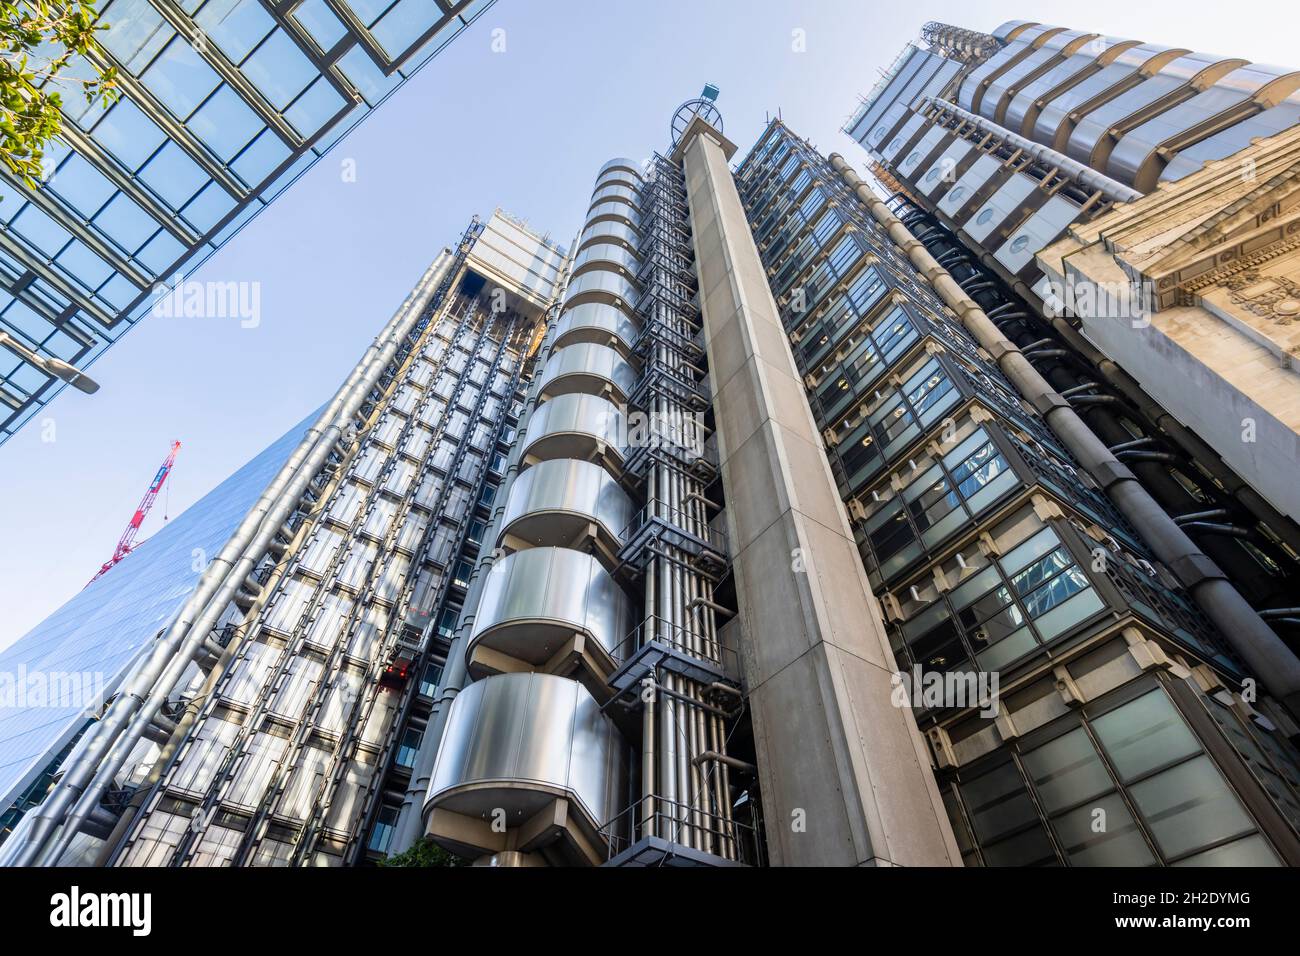 Lloyd's Building in Lime Street, City of London, insurance industry in the financial district, Bowellism architecture, now a Grade 1 listed building Stock Photo